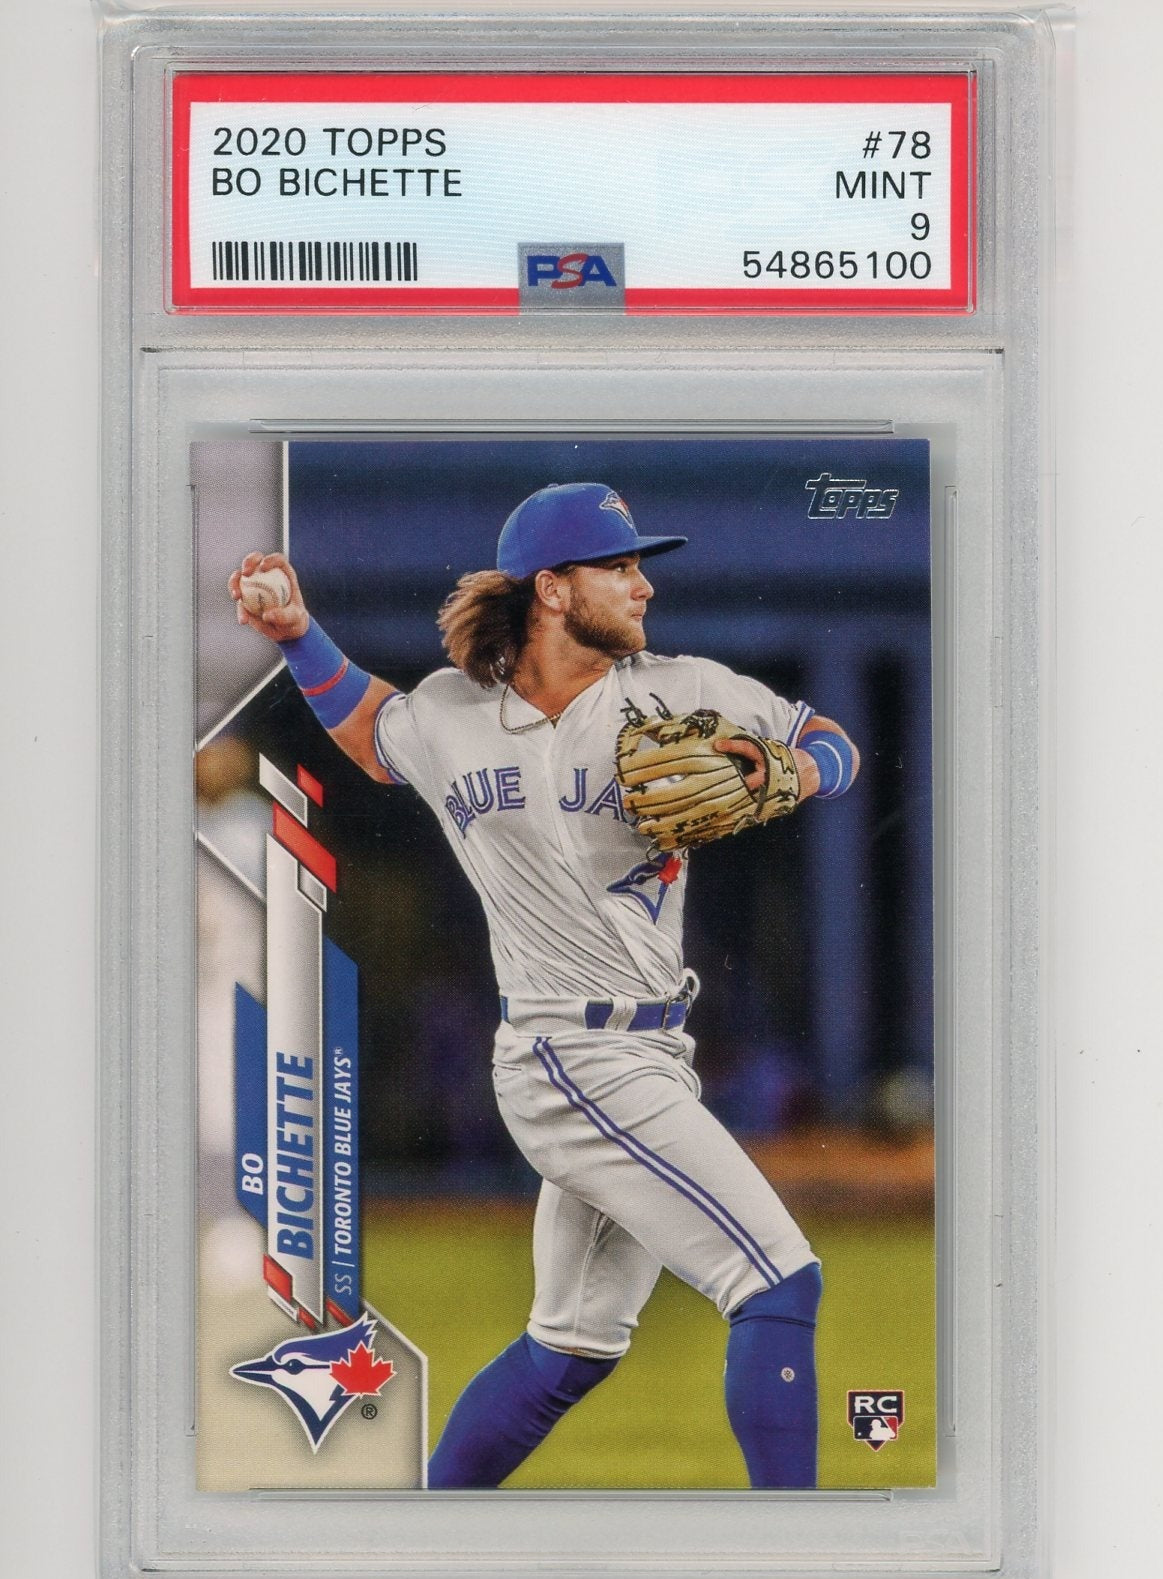 Bo Bichette 2020 Topps rookie card PSA 9 – Piece Of The Game